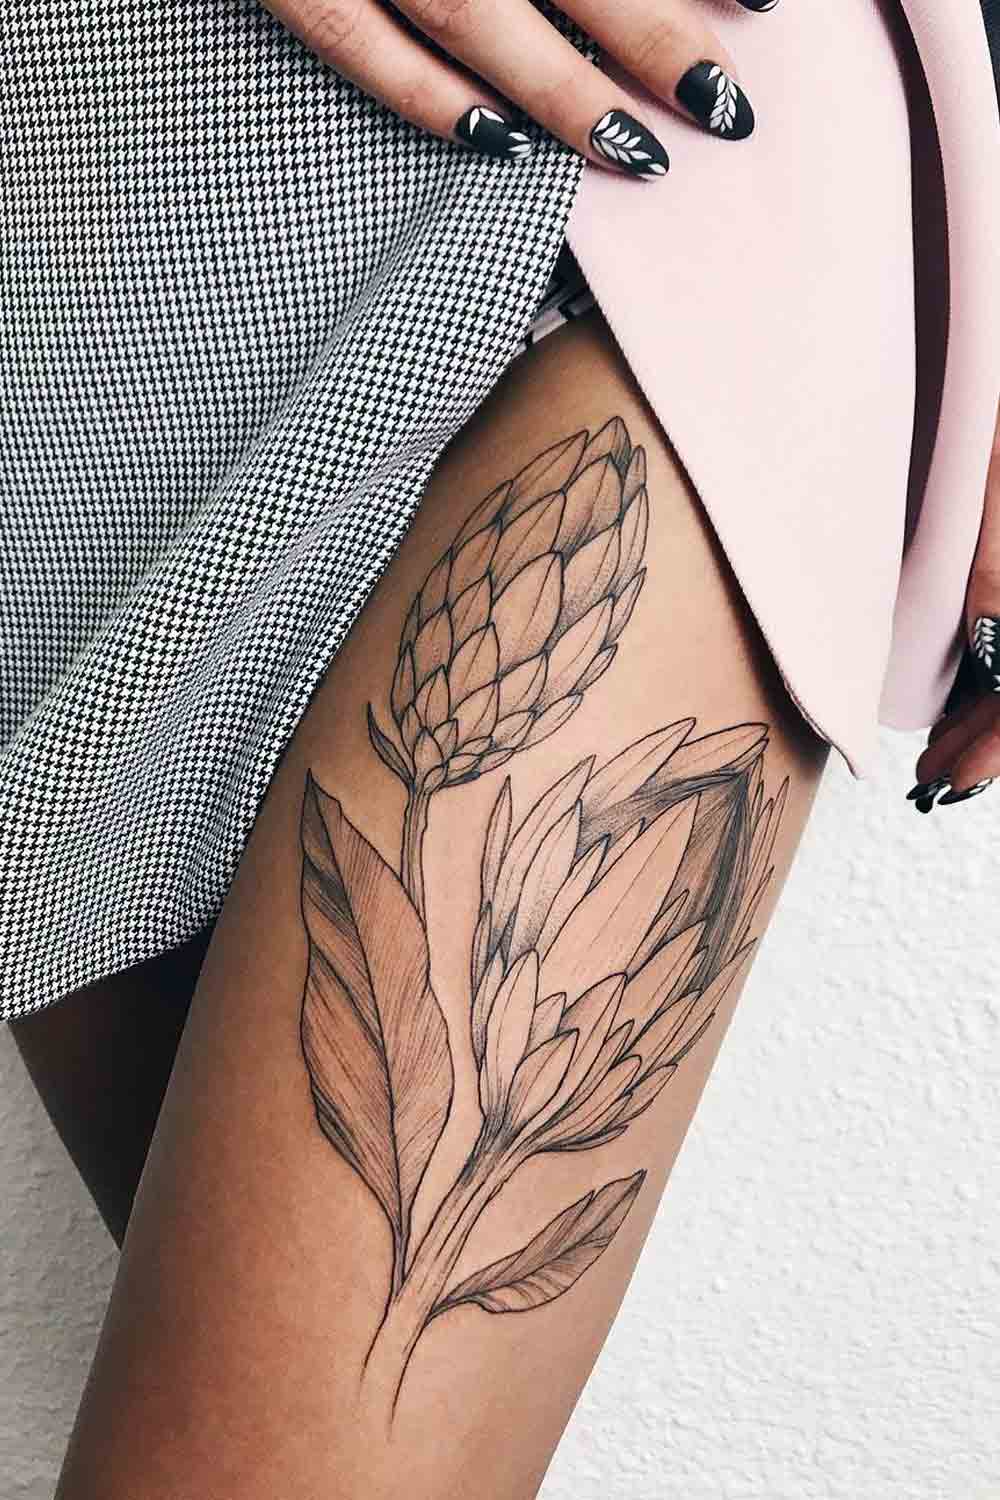 Big Black and White Thigh Tattoo with Flowers